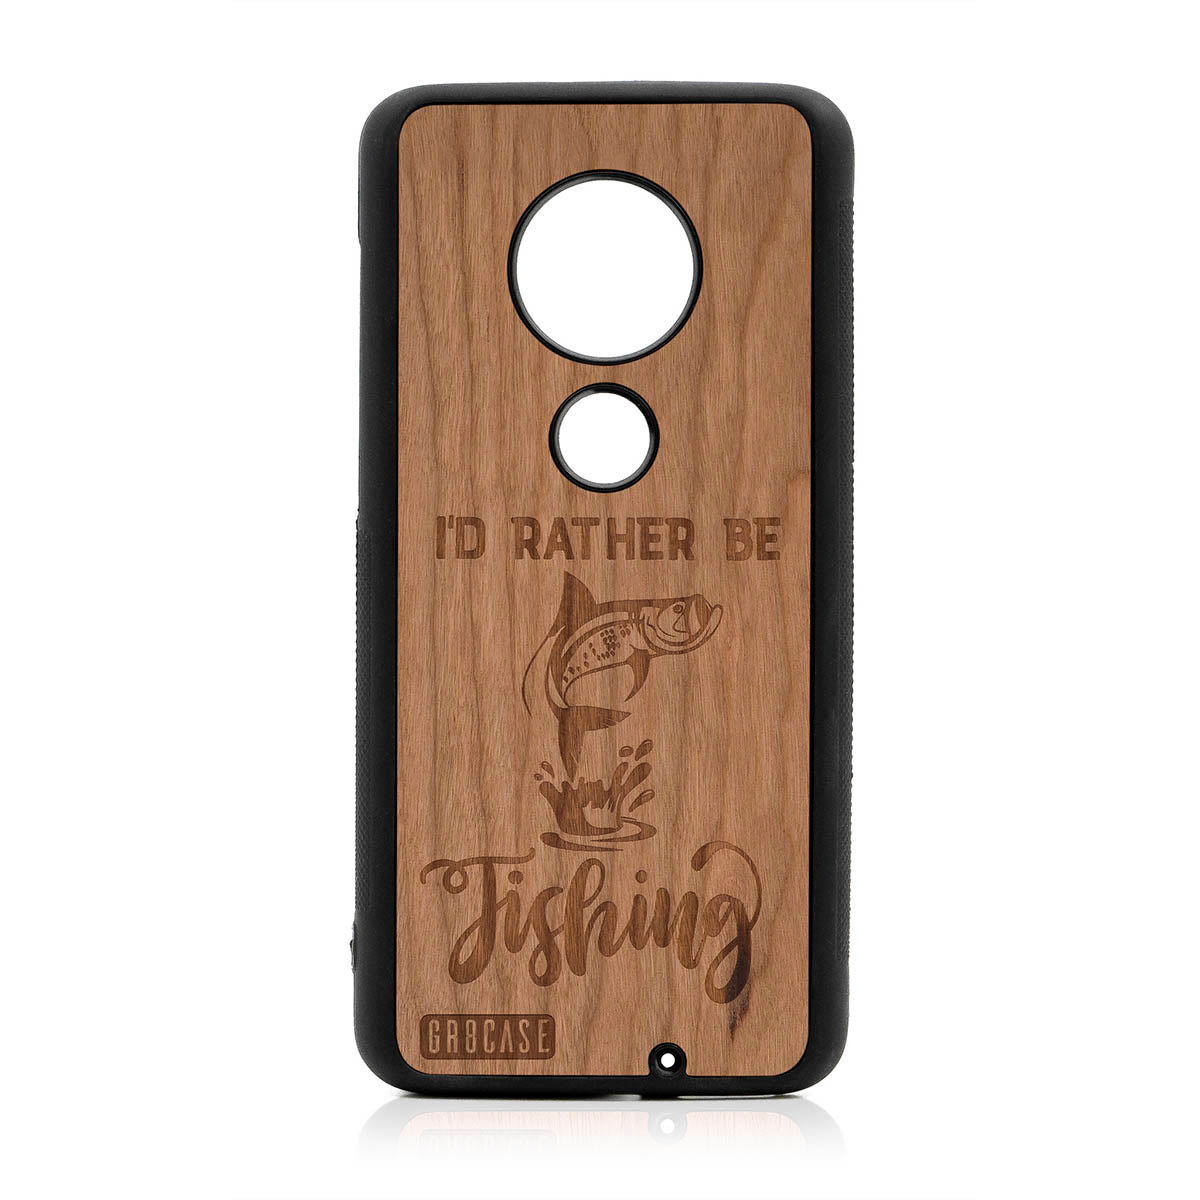 I'D Rather Be Fishing Design Wood Case For Moto G7 Plus